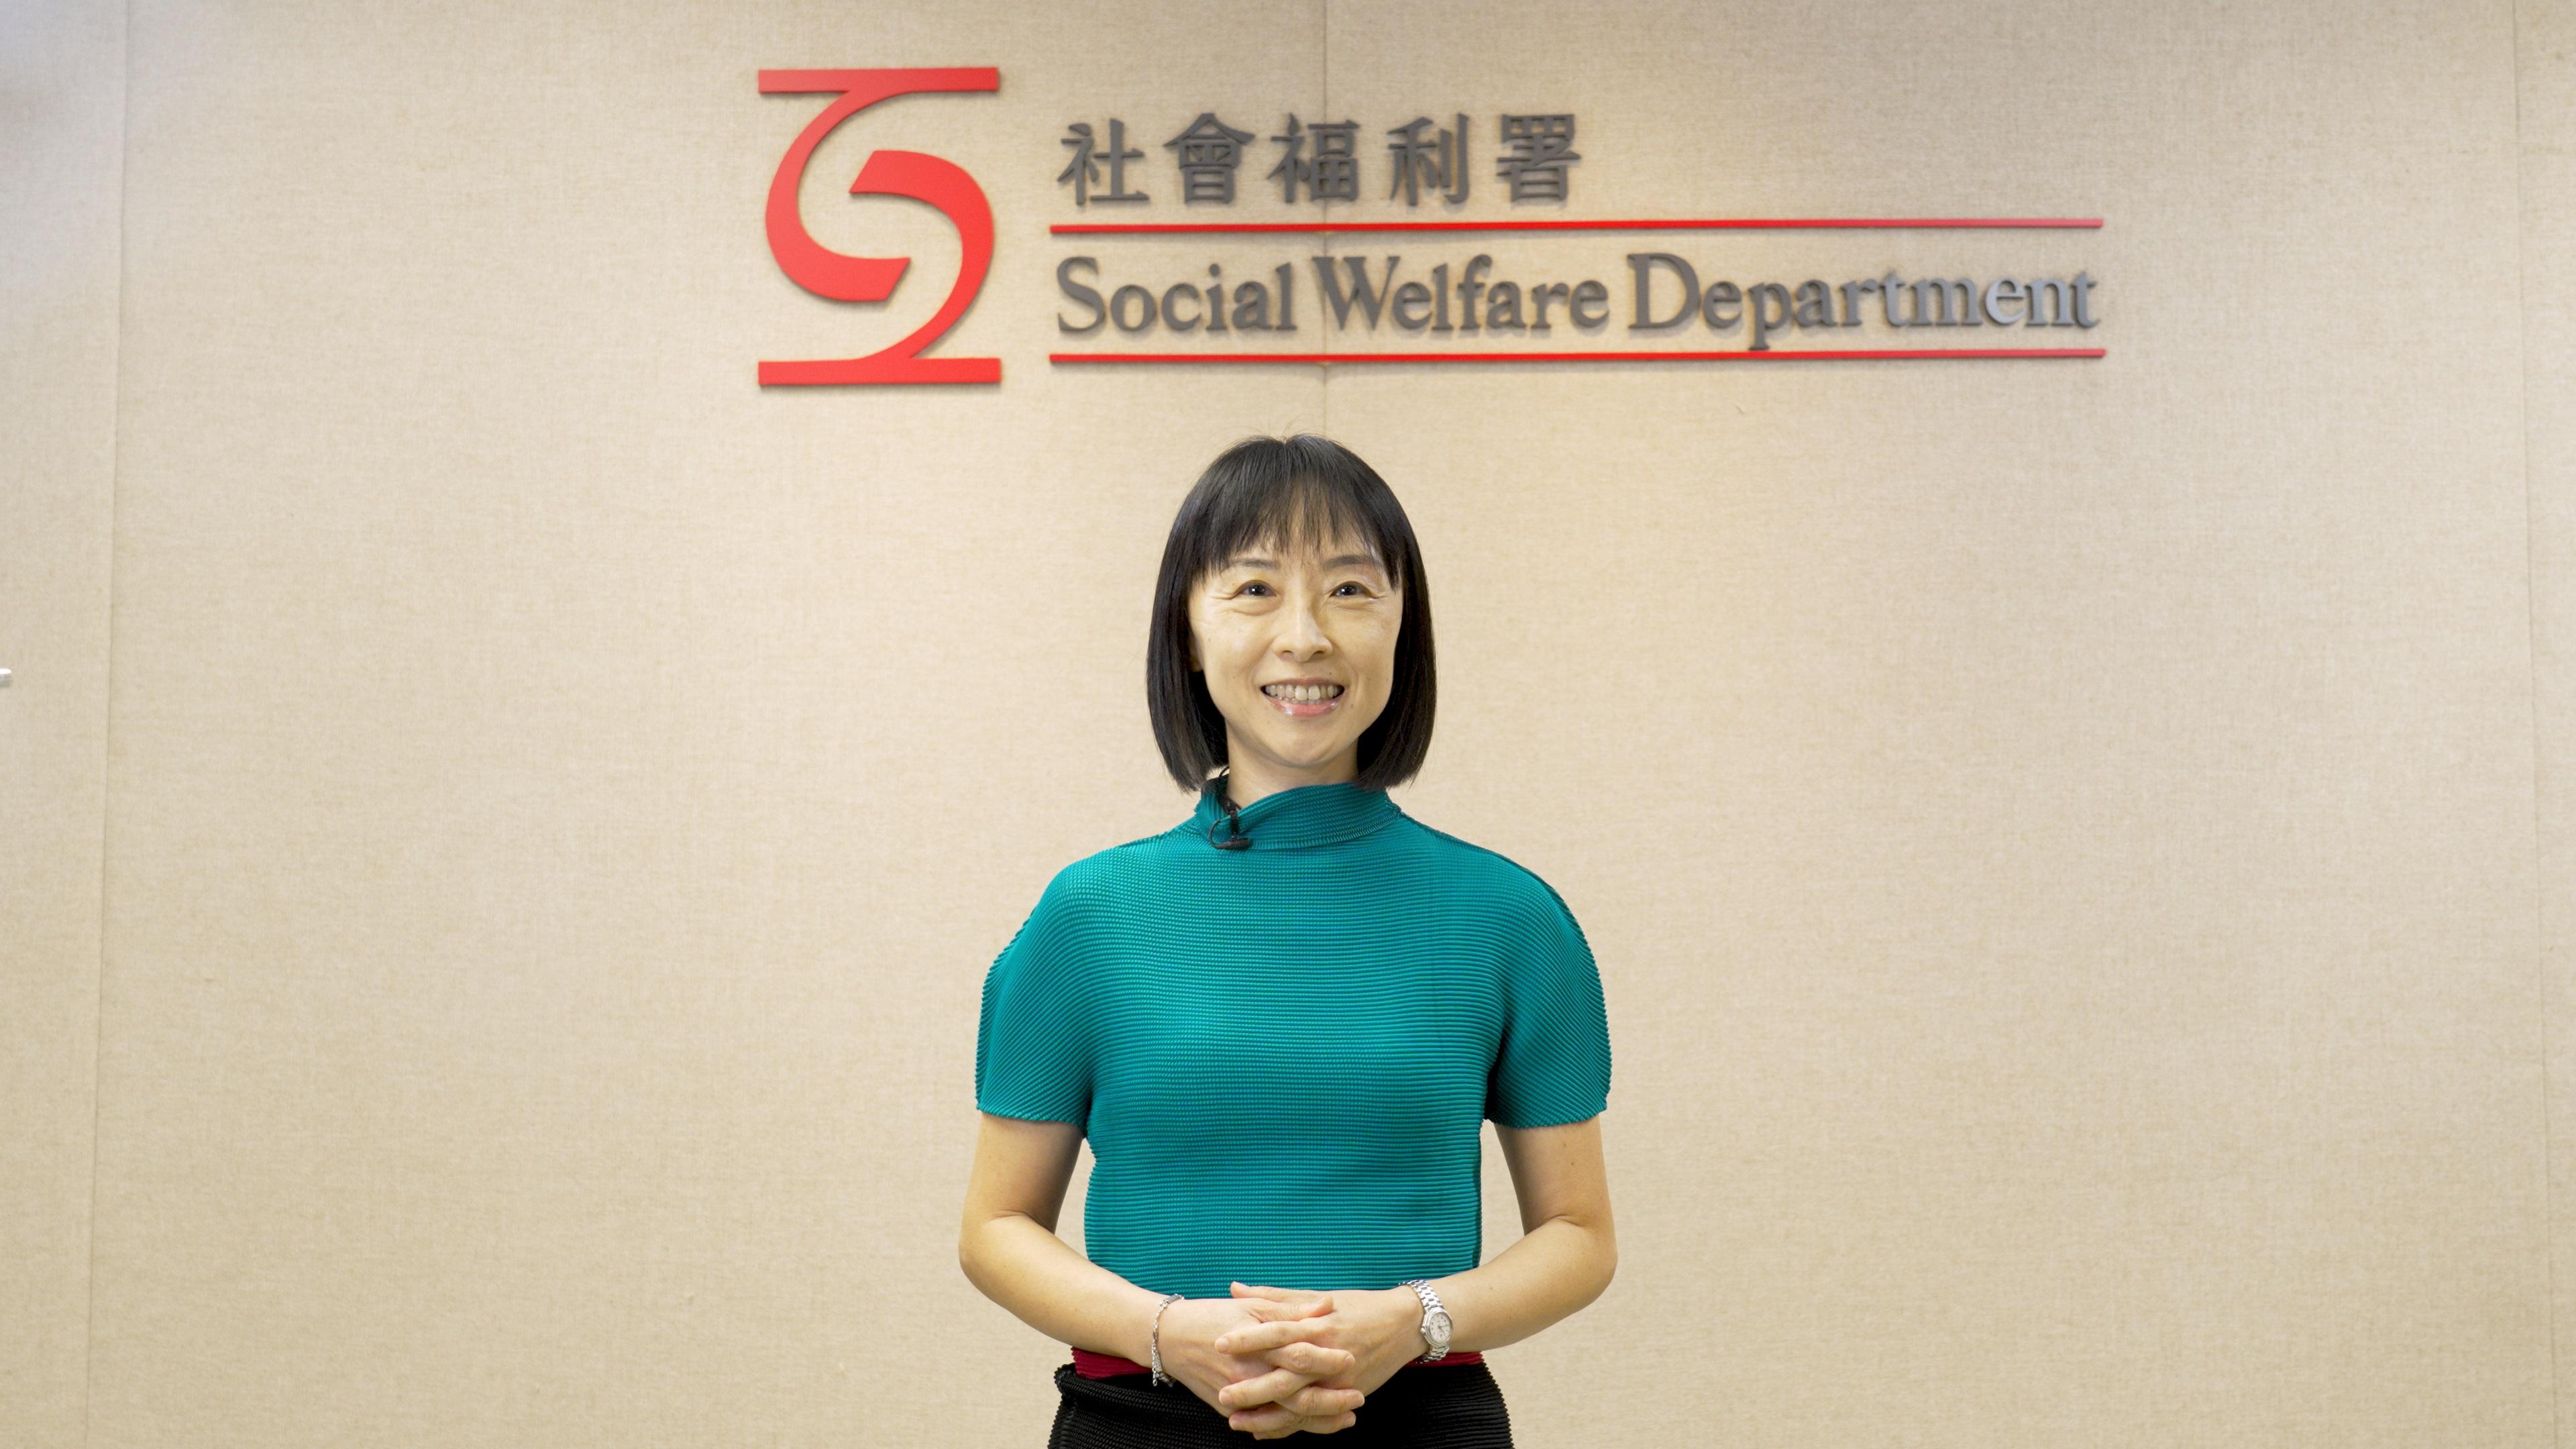 The Social Welfare Department today (November 20) held a ceremony for the 2022 Child Protection Day cum 20th Anniversary of the Publicity Campaign "Strengthening Families and Combating Violence" in online format. Photo shows the Director of Social Welfare, Miss Charmaine Lee, delivering a welcome speech at the ceremony.
